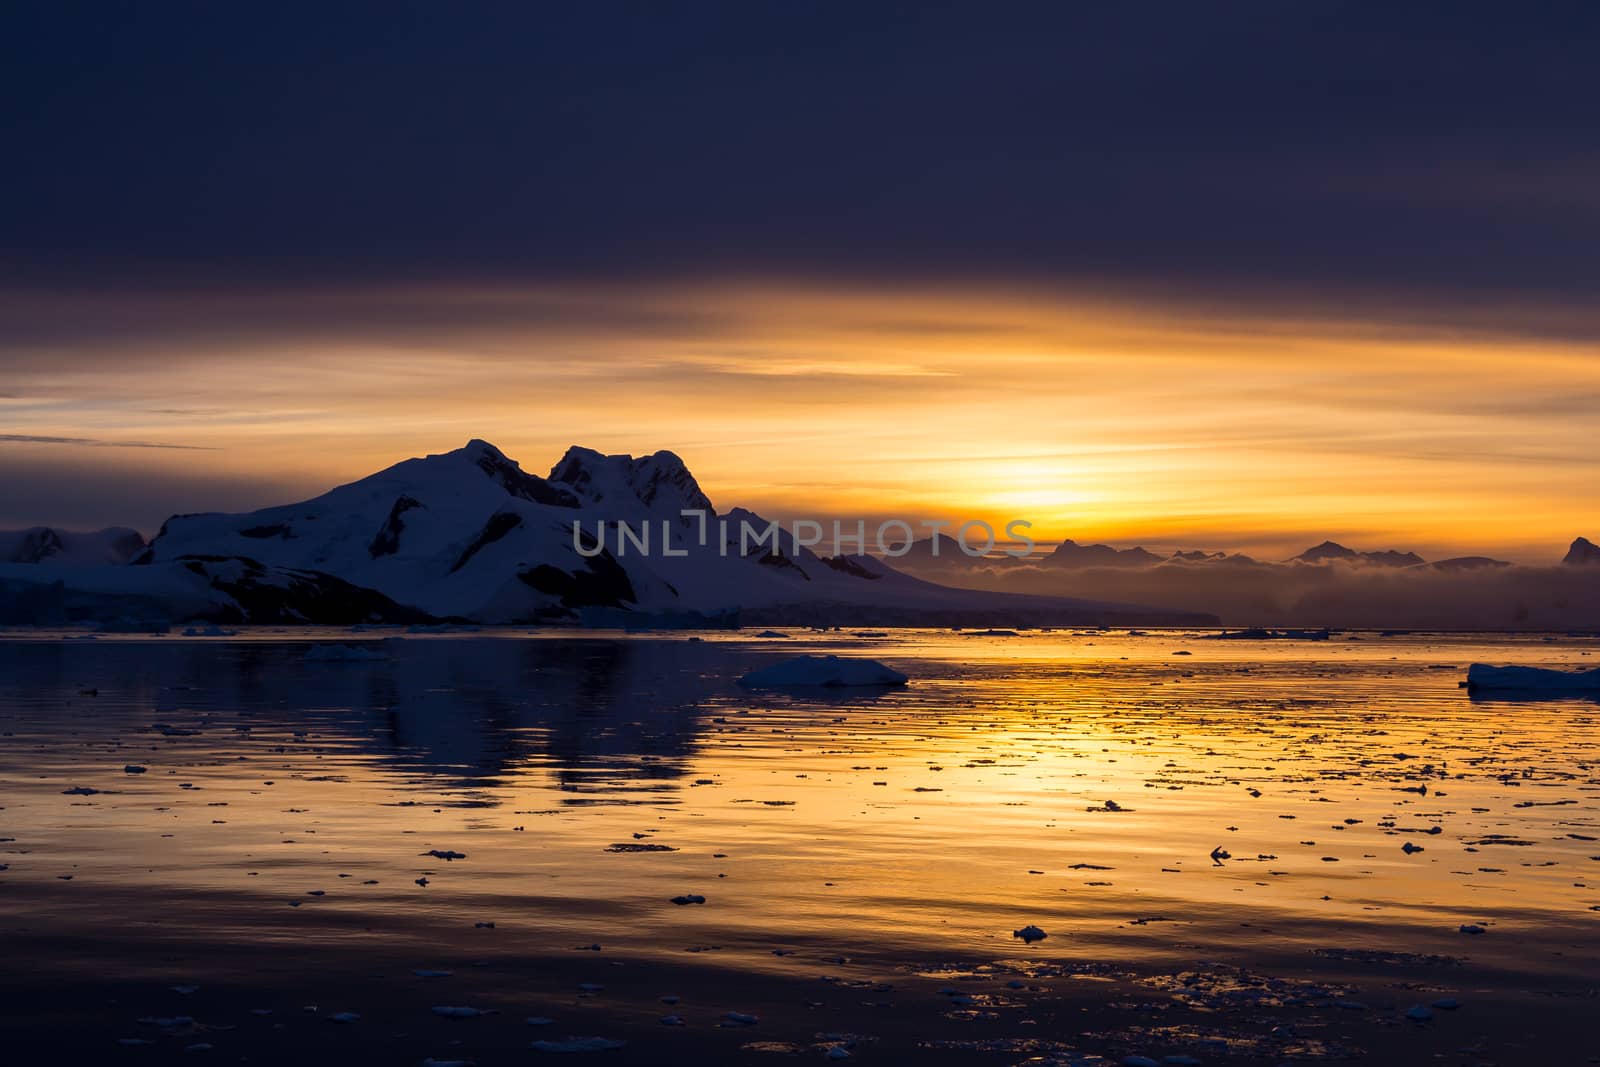 Sunset at Lemaire Channel, Antarctica by ambeon